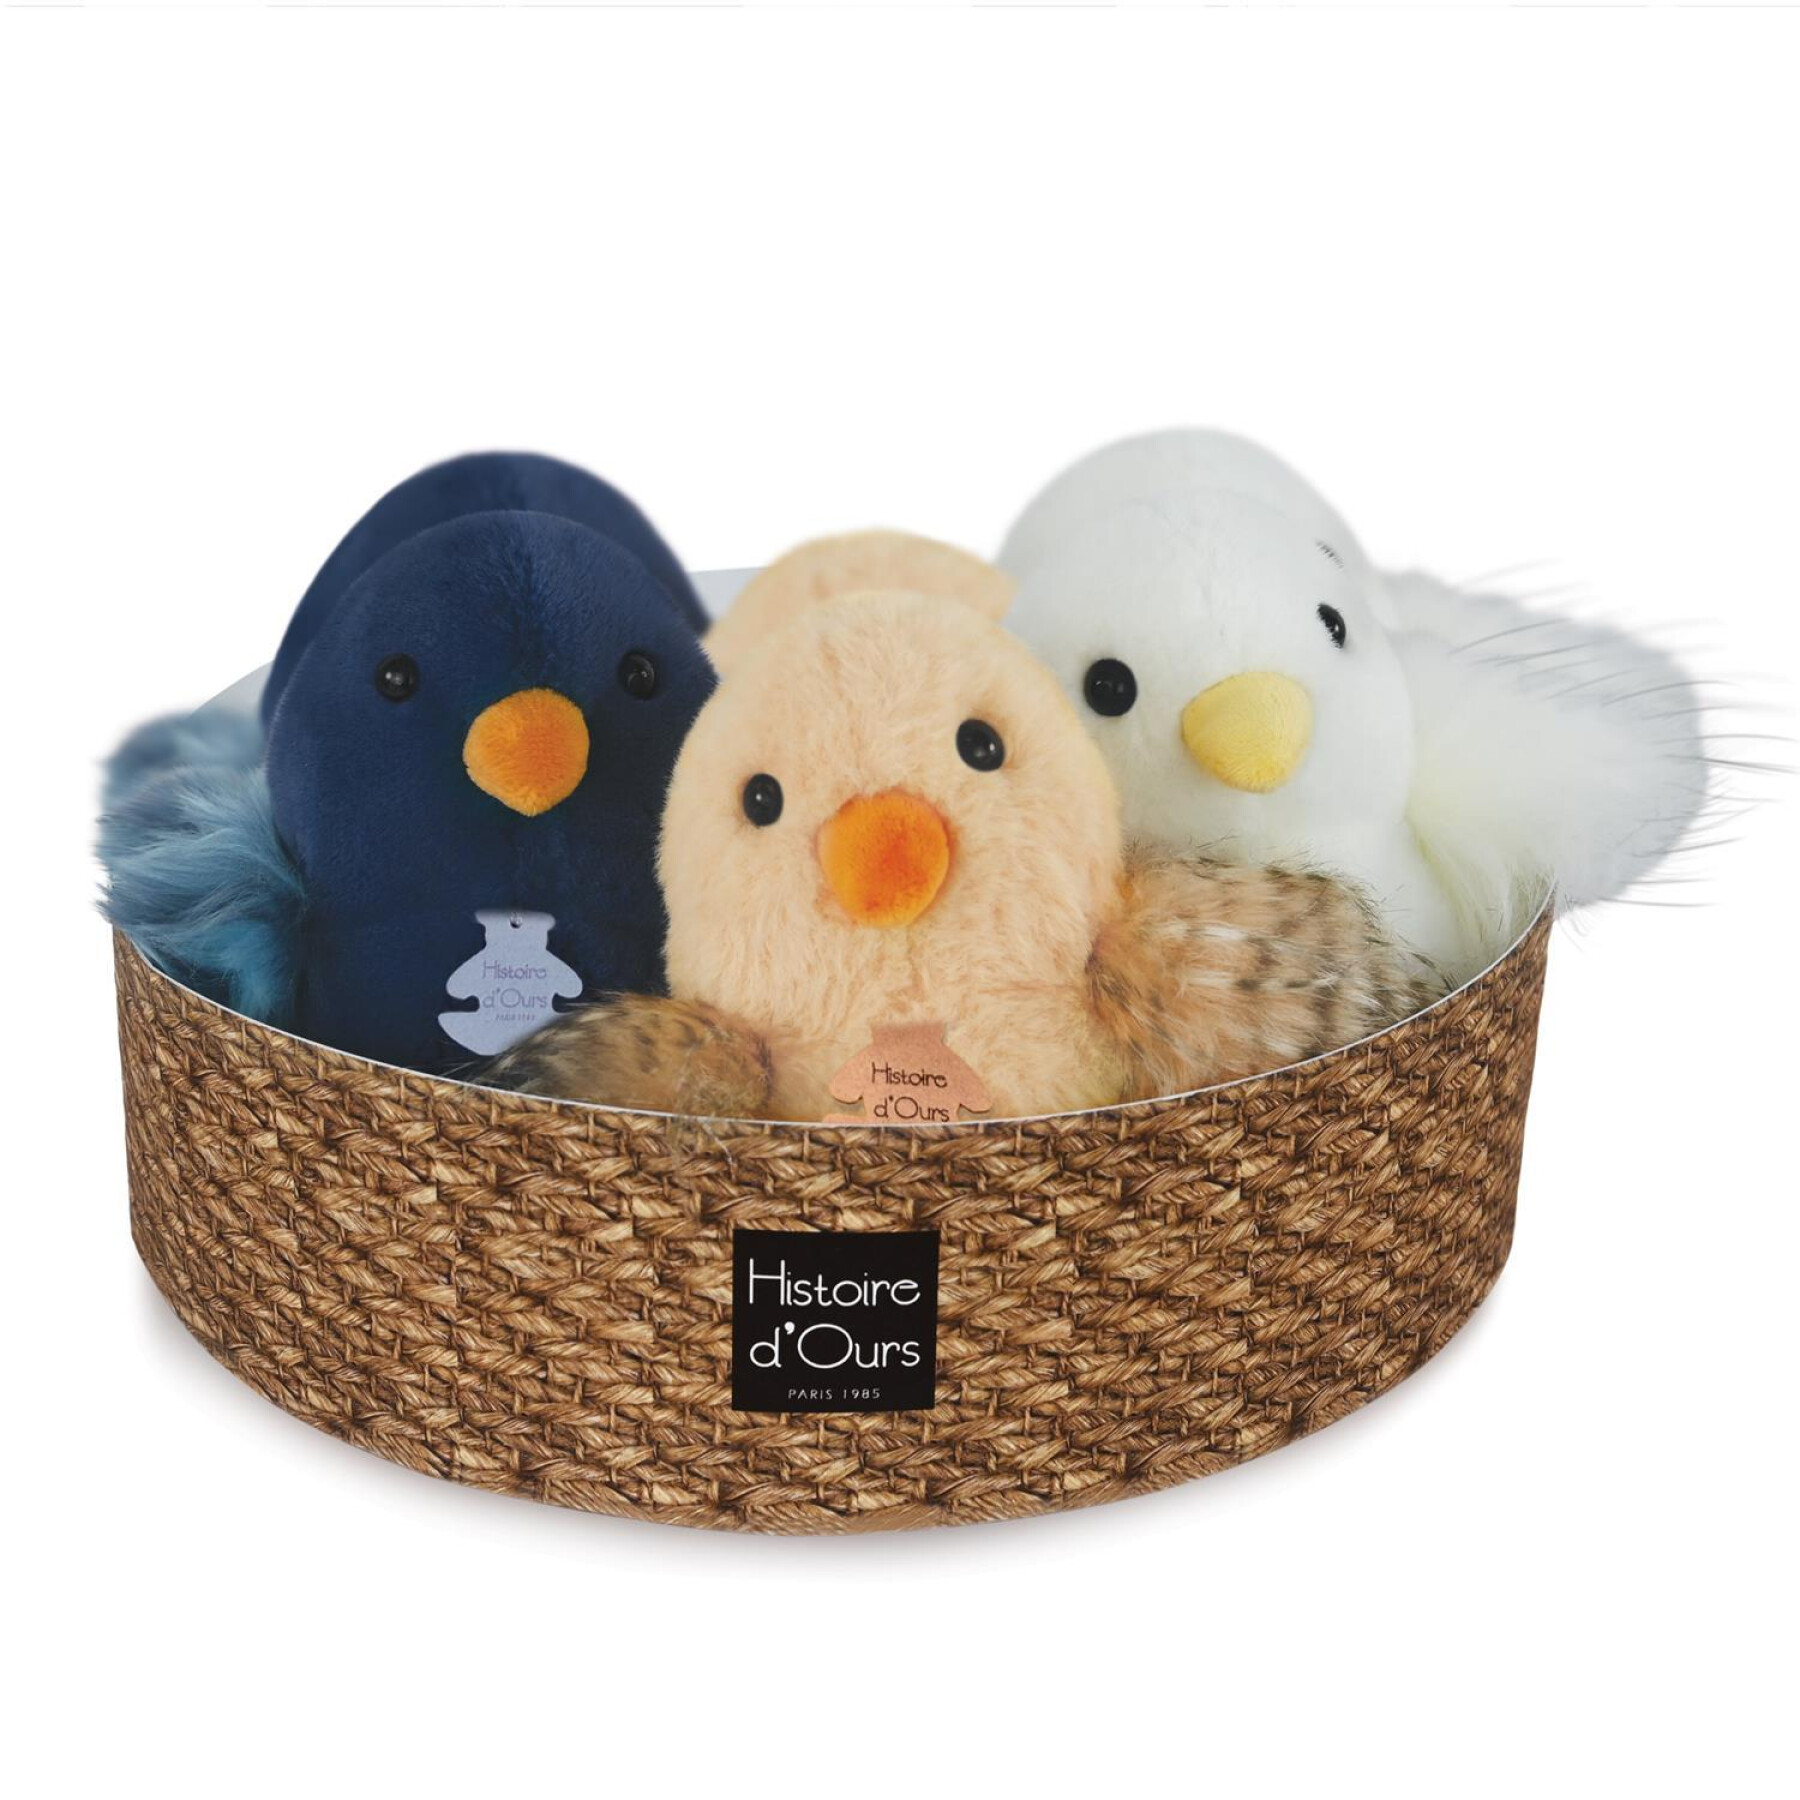 Assorted plush chicks Histoire d'Ours Display  (x3)